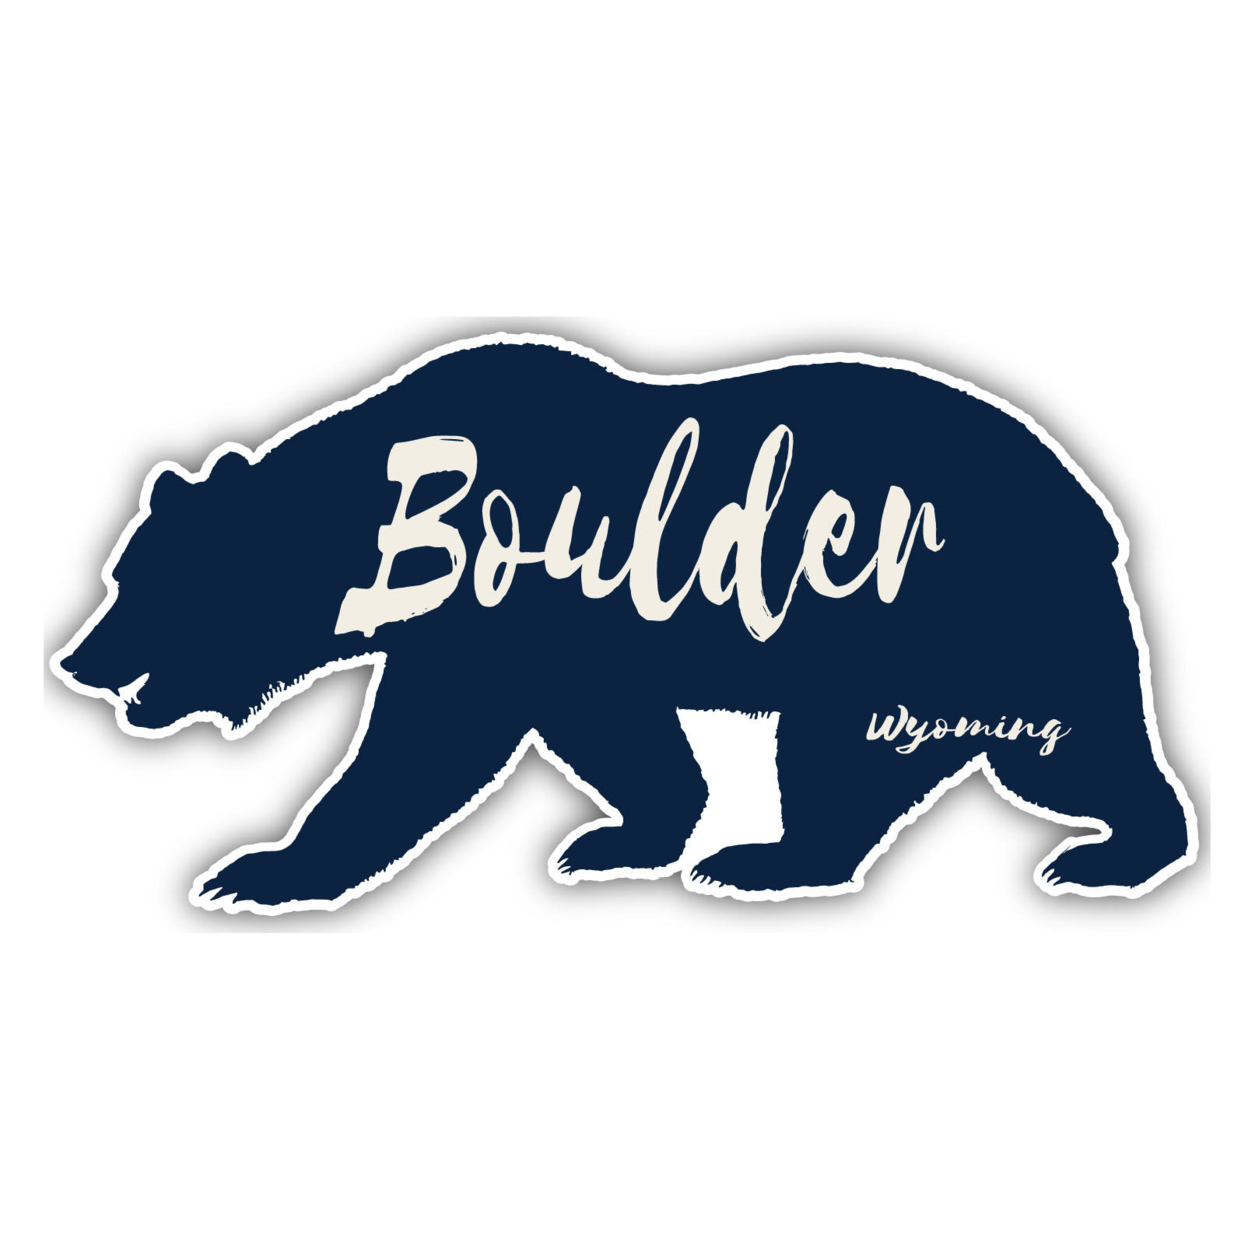 Boulder Wyoming Souvenir Decorative Stickers (Choose Theme And Size) - 4-Pack, 4-Inch, Bear